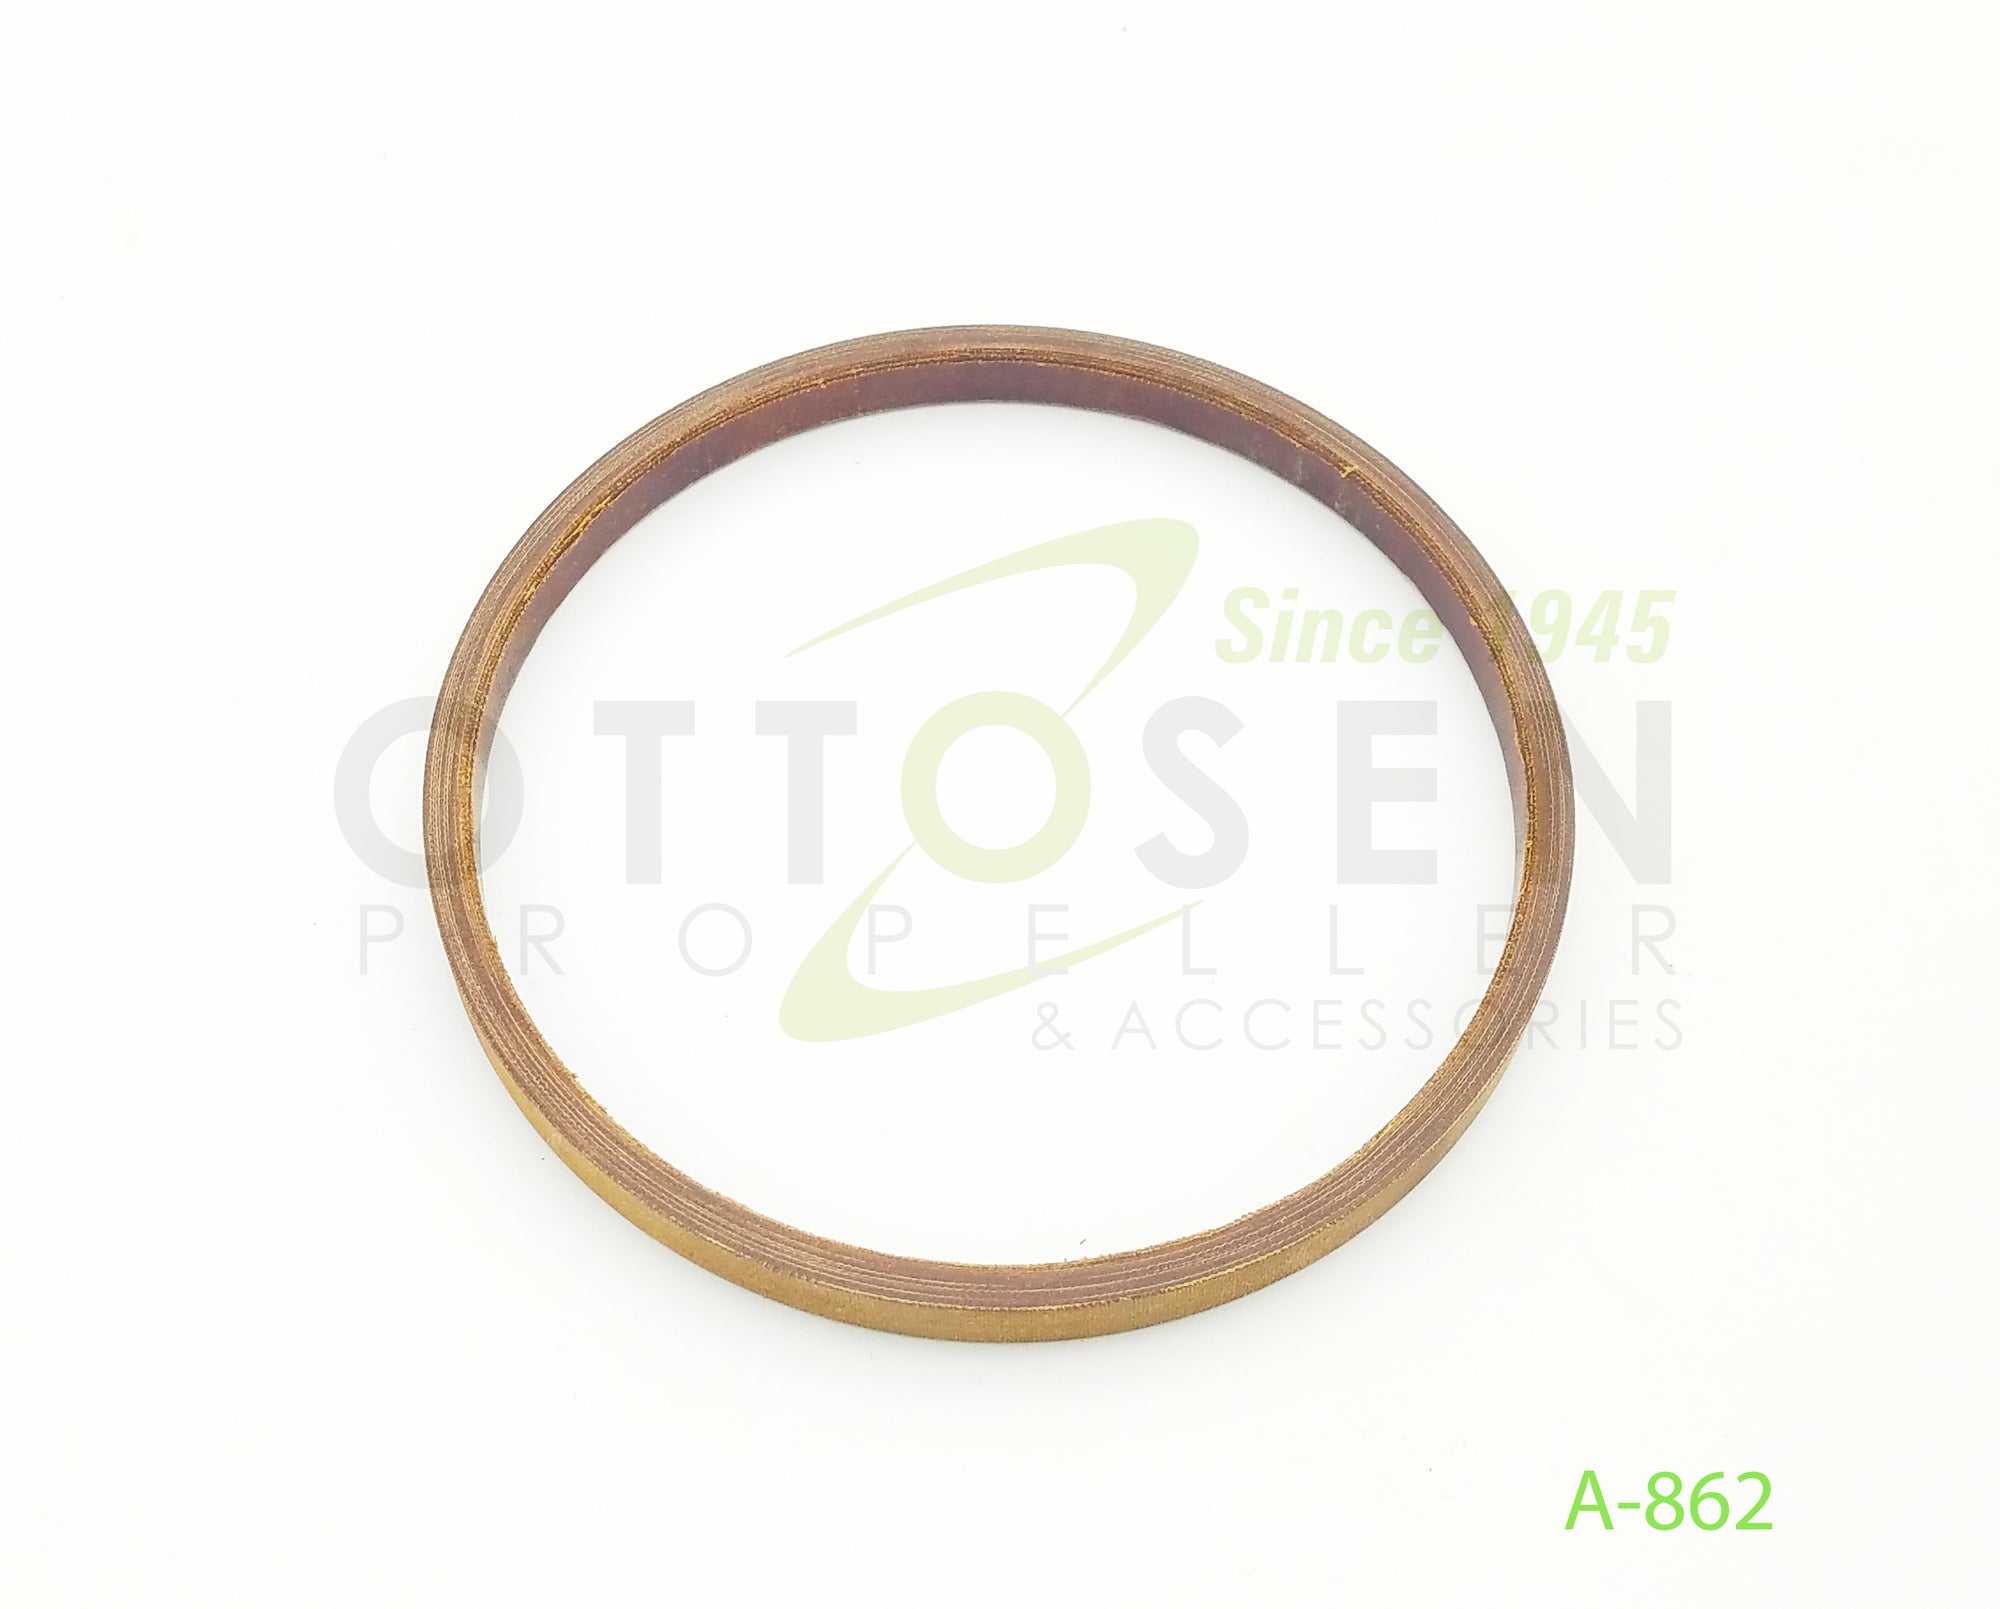 A-862-HARTZELL-PROPELLER-PLASTIC-BUSHING-PICTURE-1